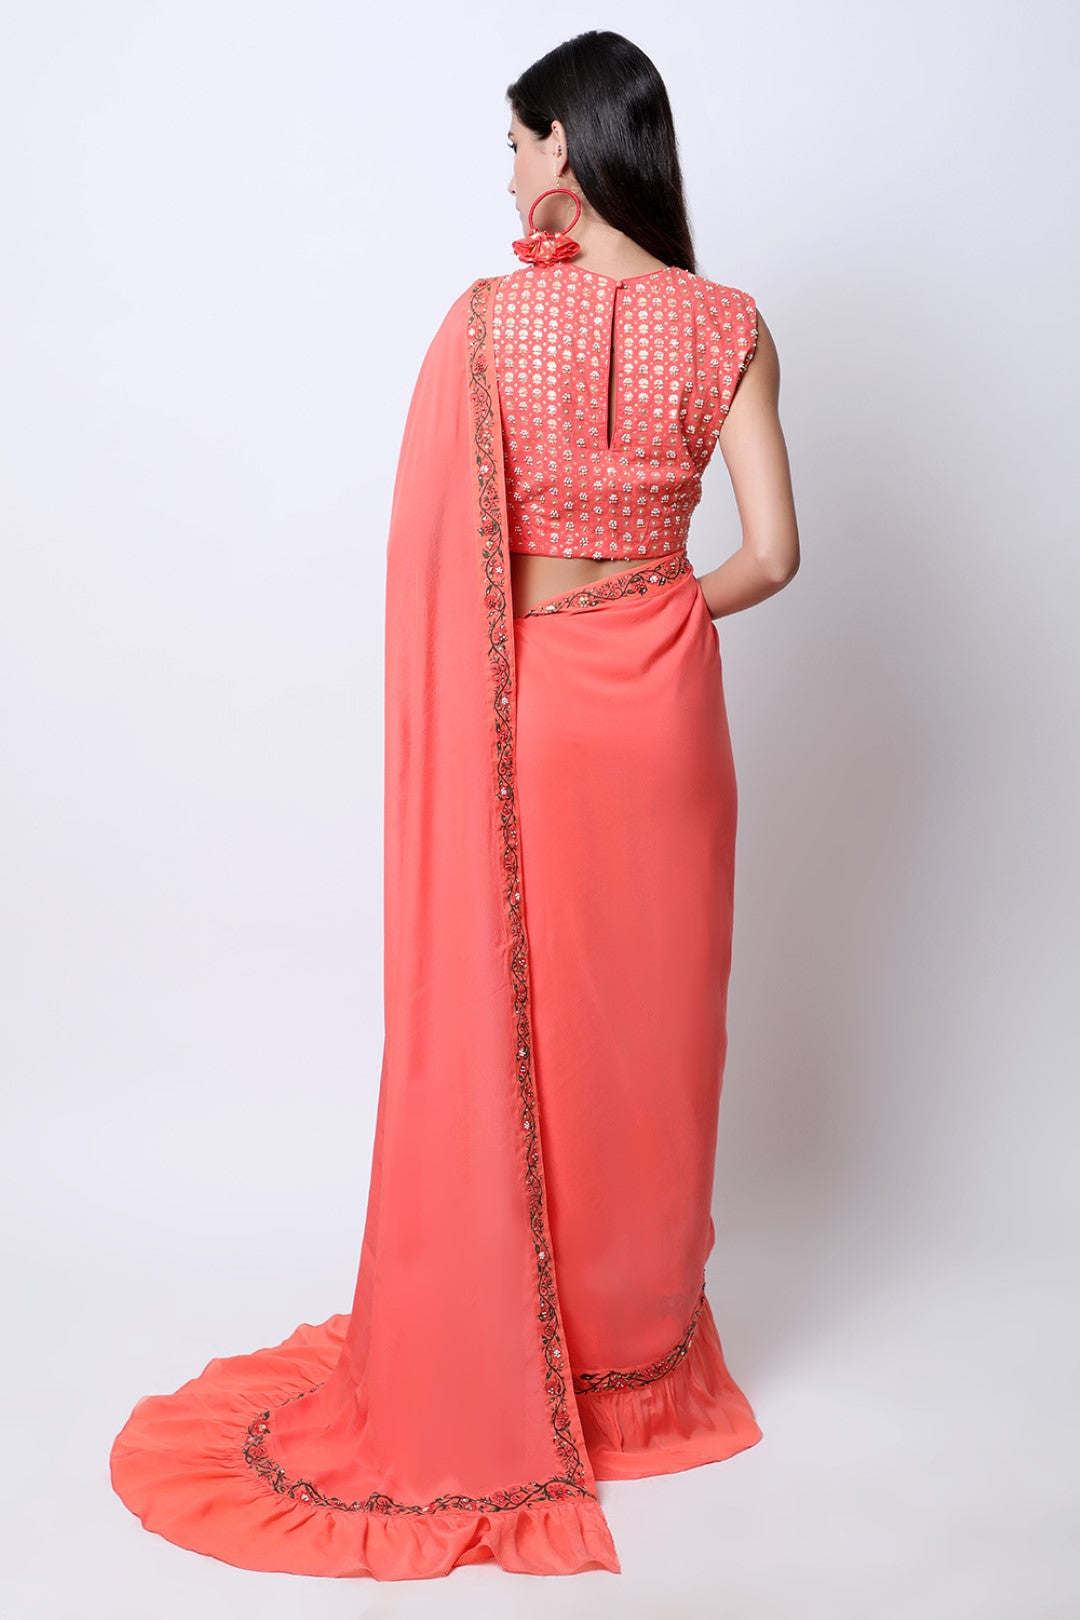 Gajari Coral frill saree with bel detail , paired with chotu sanga gold printed hand-embroidered blouse.